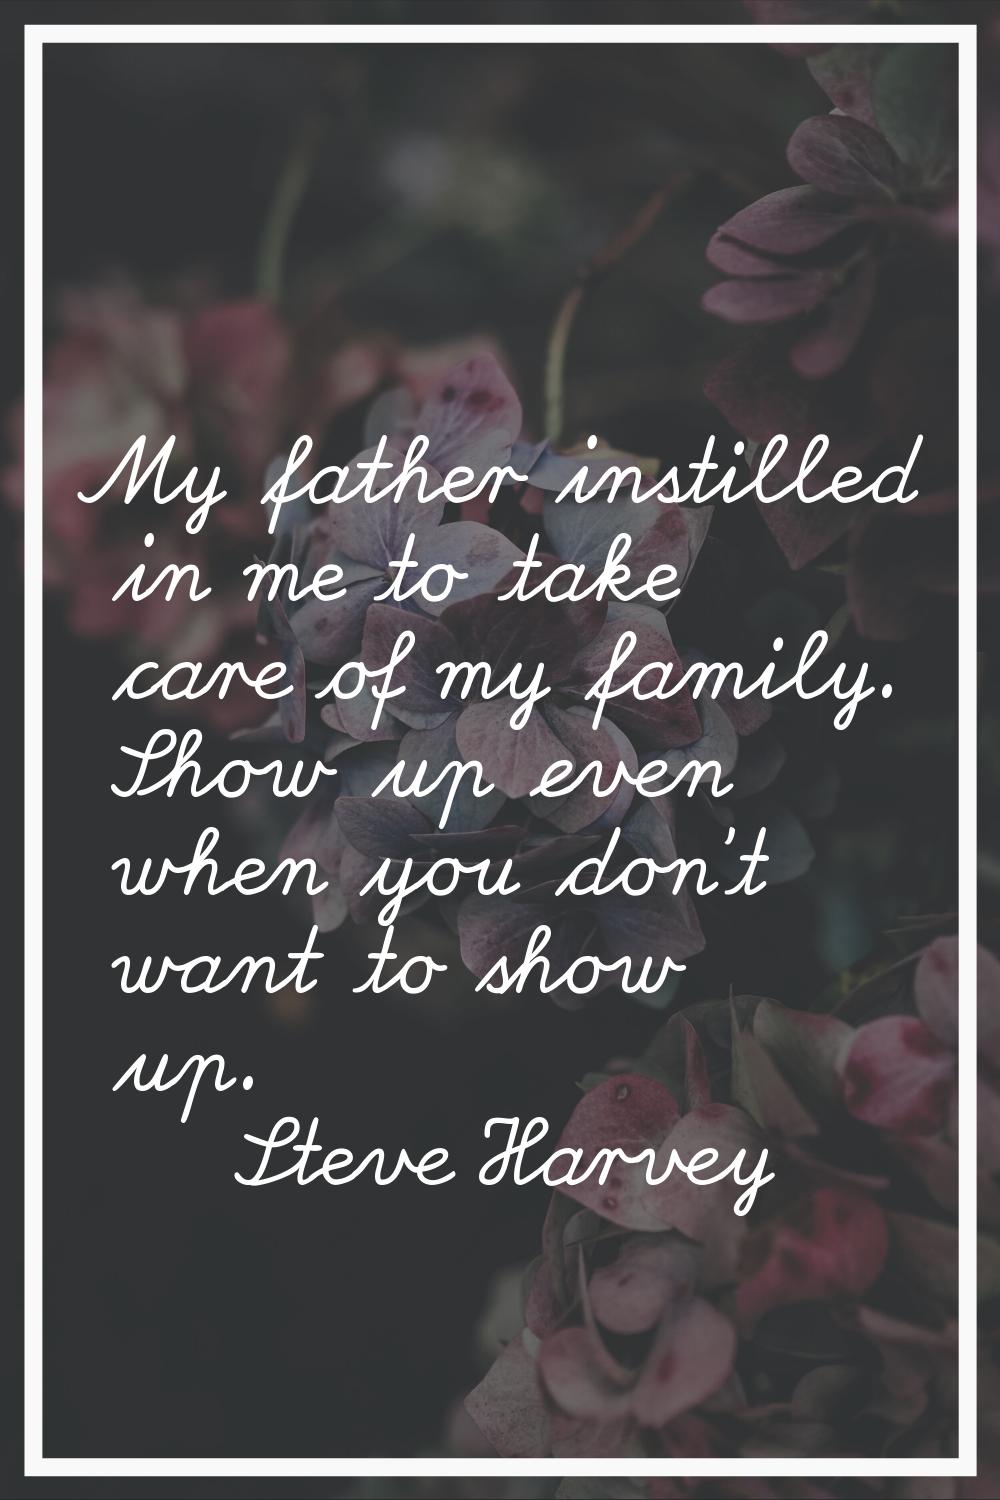 My father instilled in me to take care of my family. Show up even when you don't want to show up.